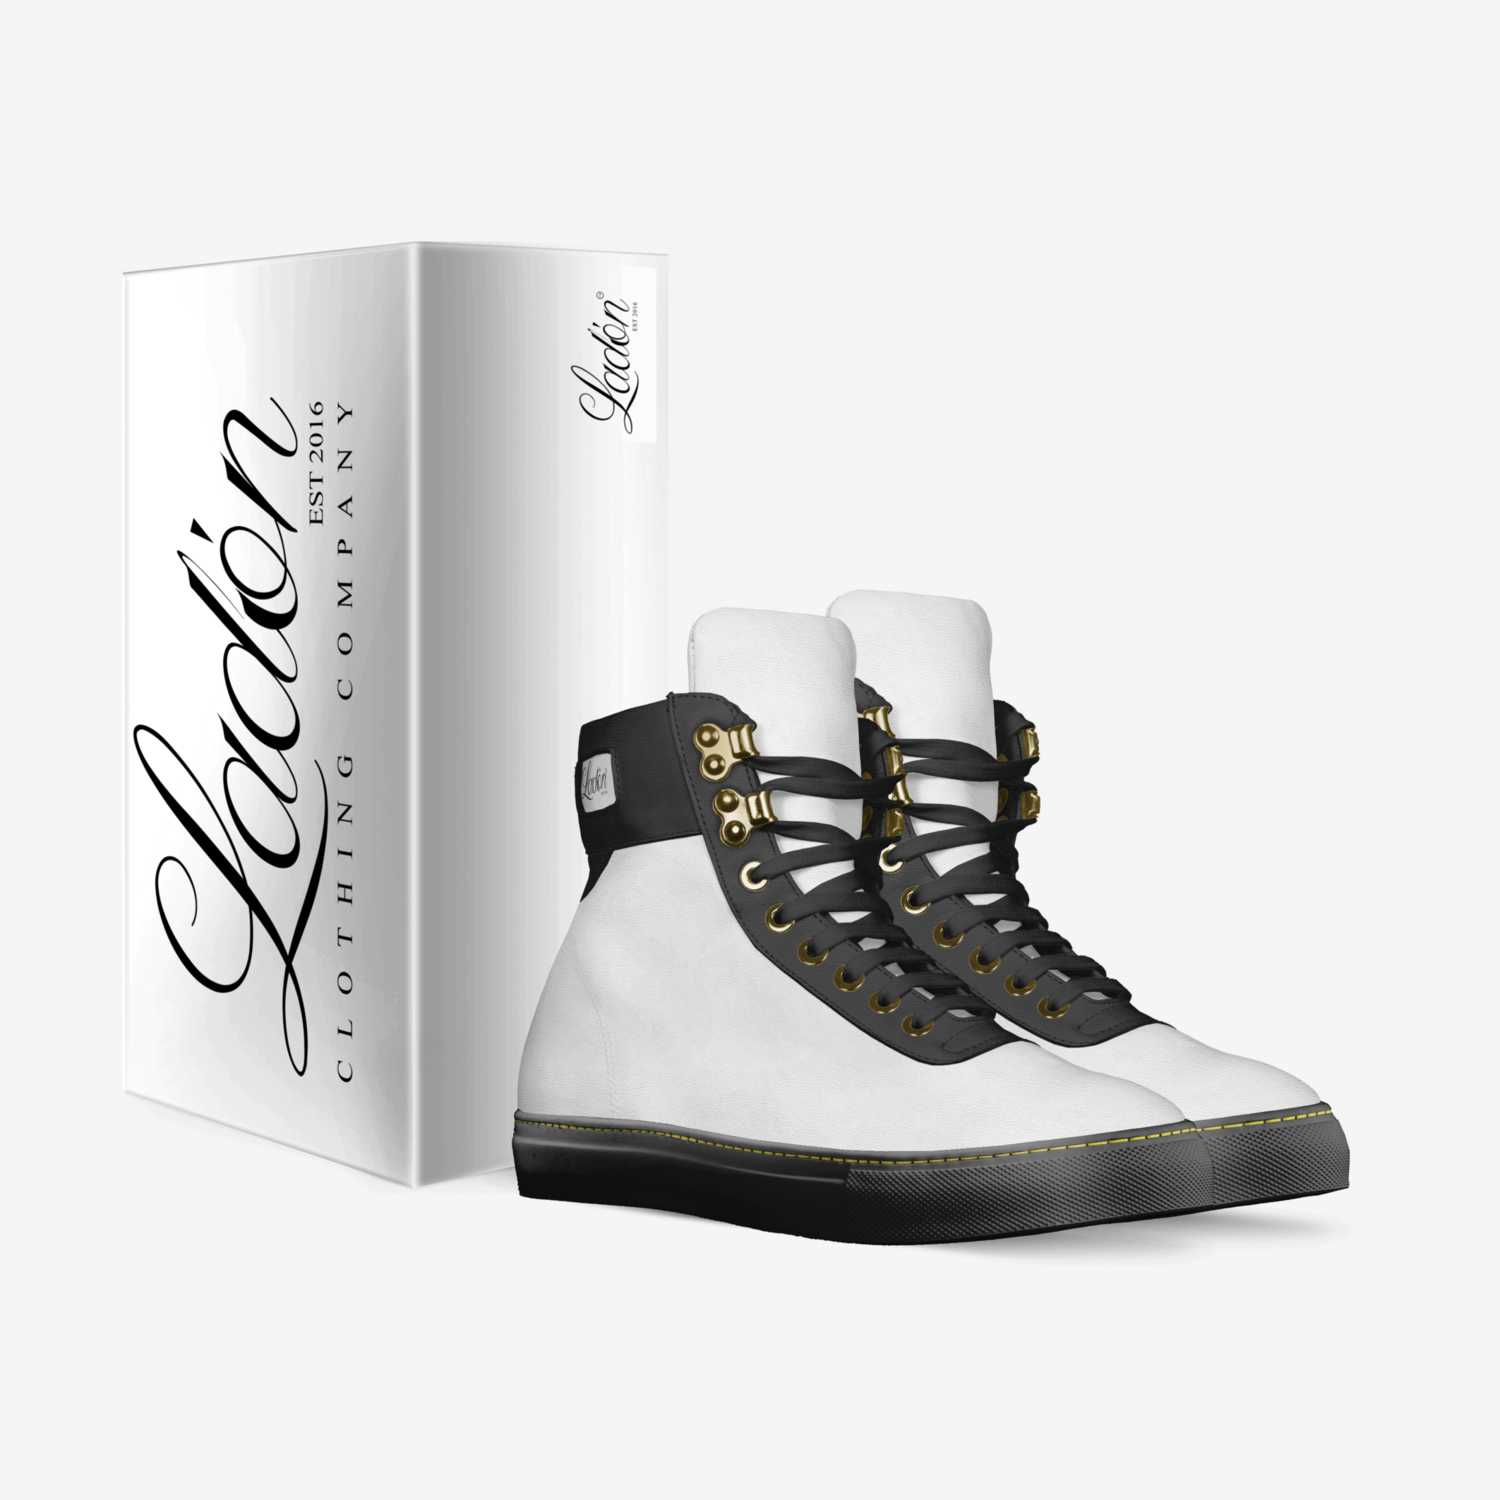 LADÓN custom made in Italy shoes by Ladón Clothing Company | Box view